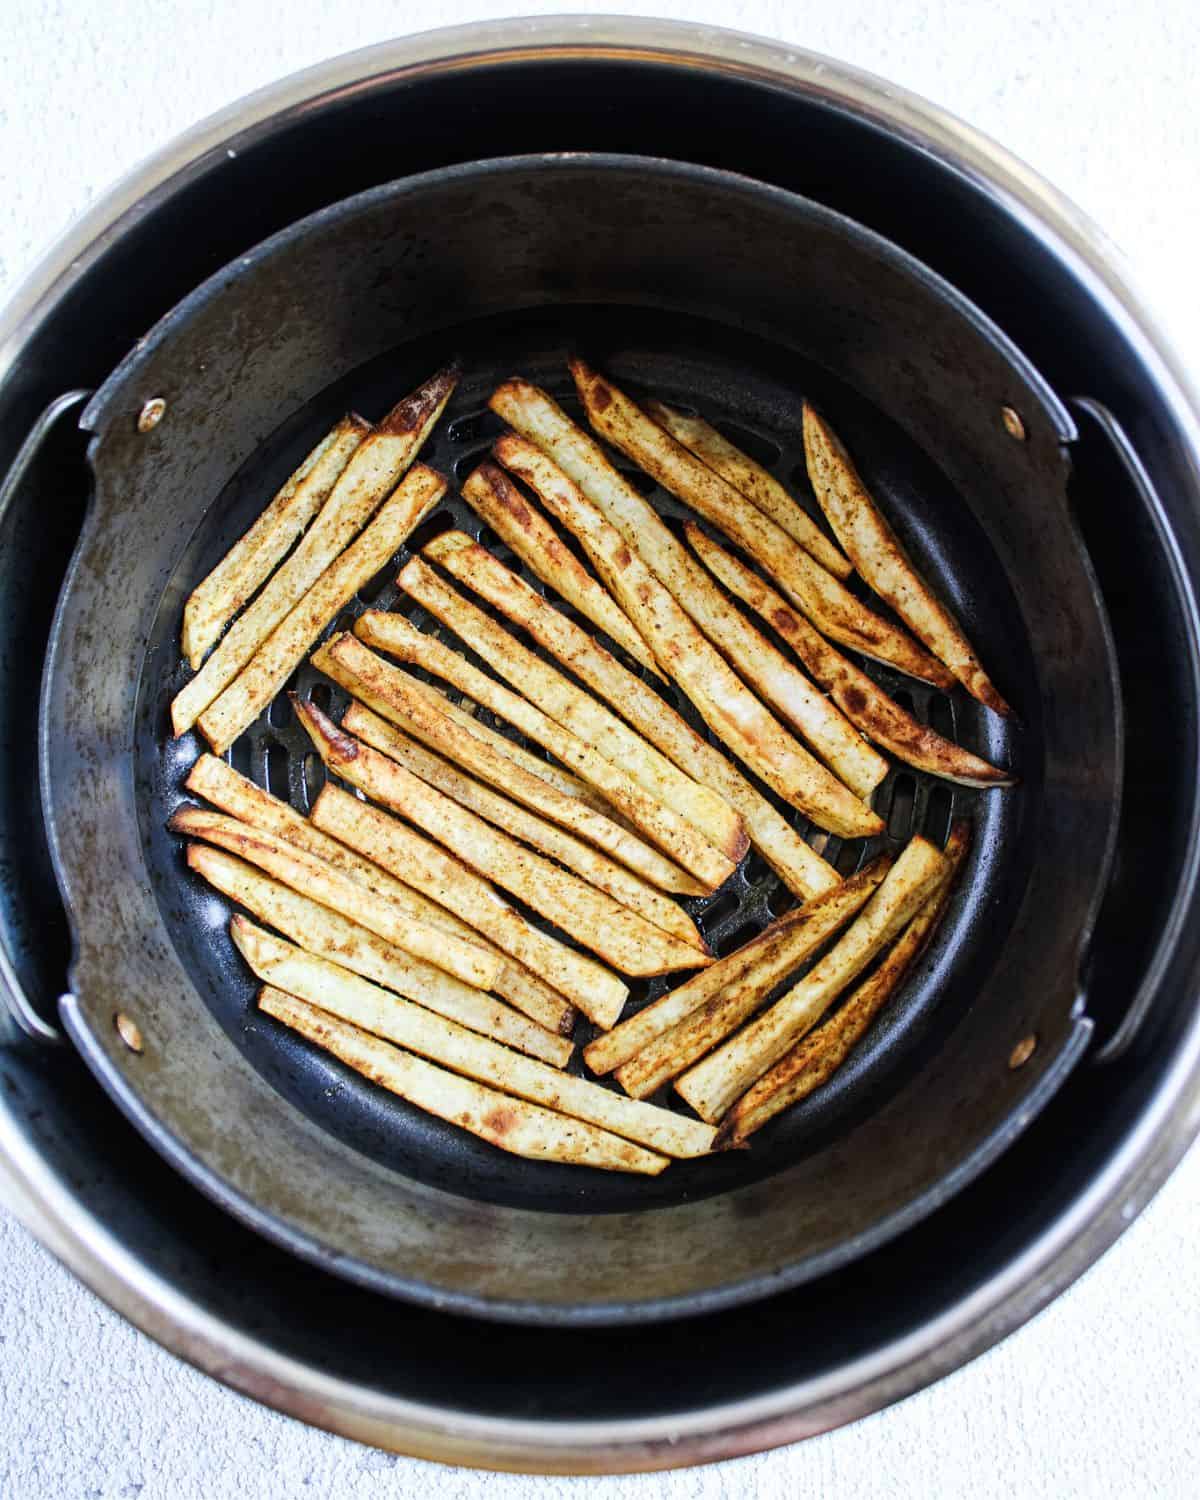 Cooked sweet potato fries in the air-fryer basket.